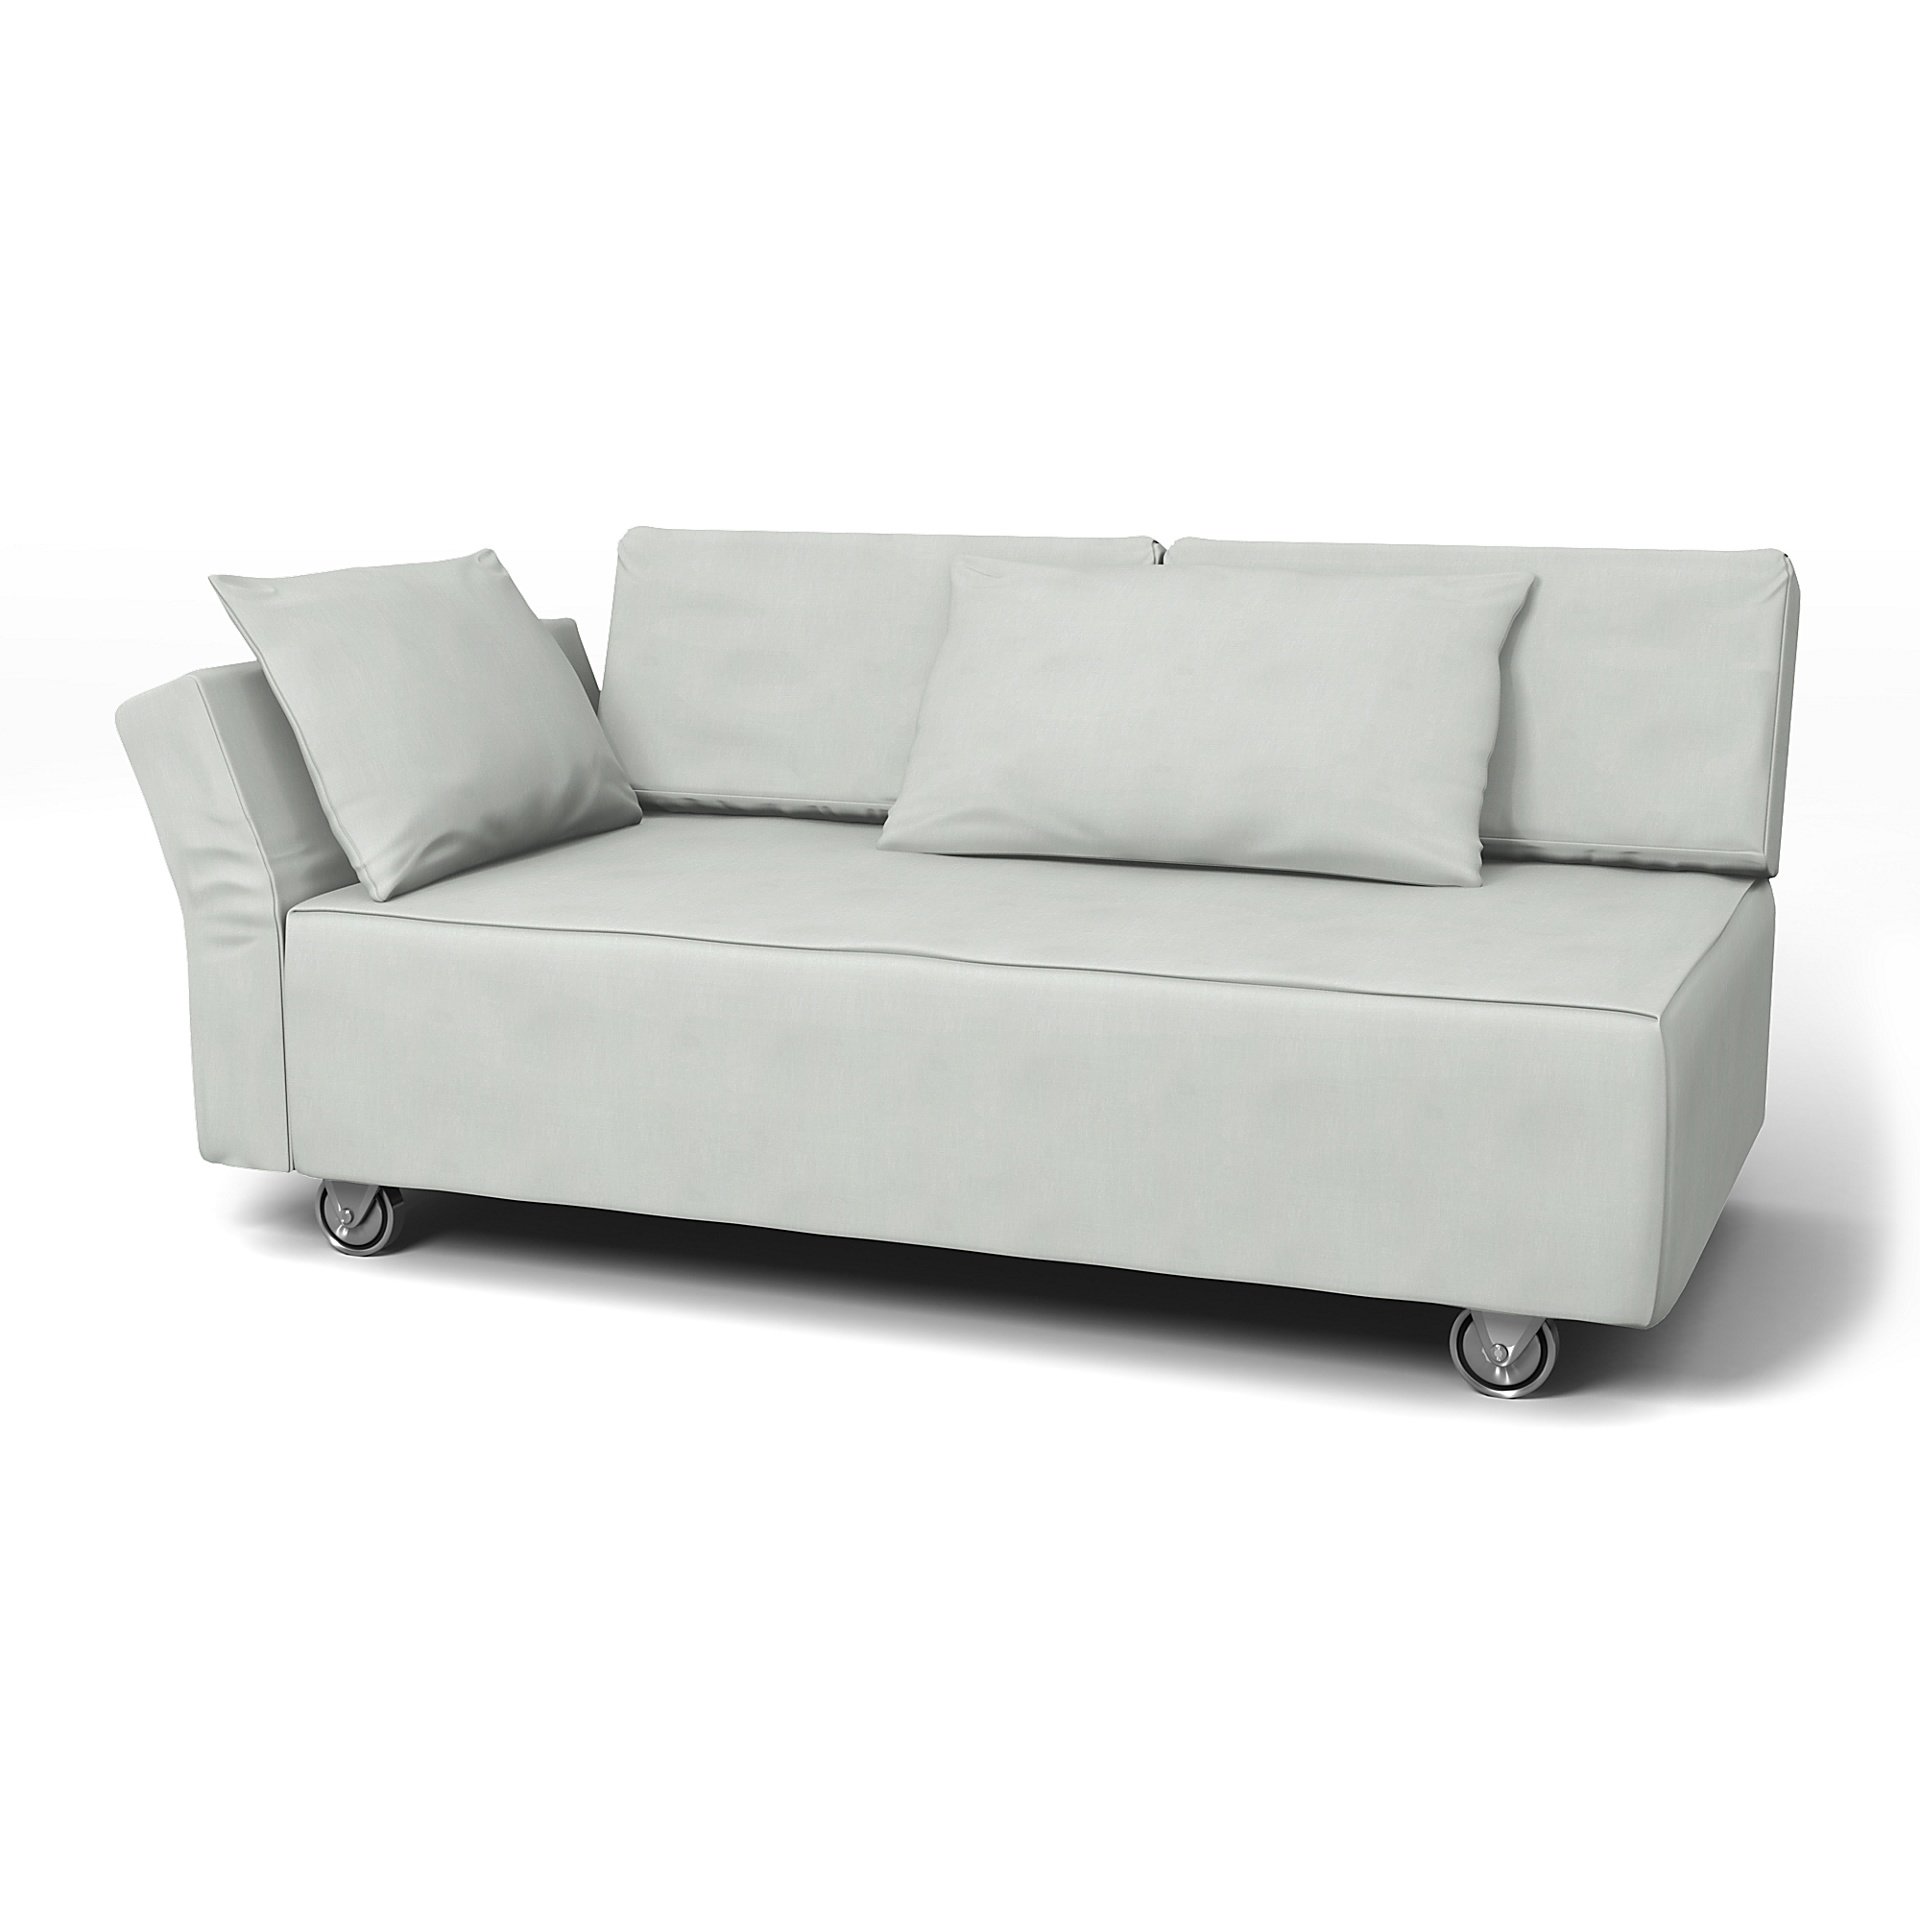 IKEA - Falsterbo 2 Seat Sofa with Left Arm Cover, Silver Grey, Linen - Bemz